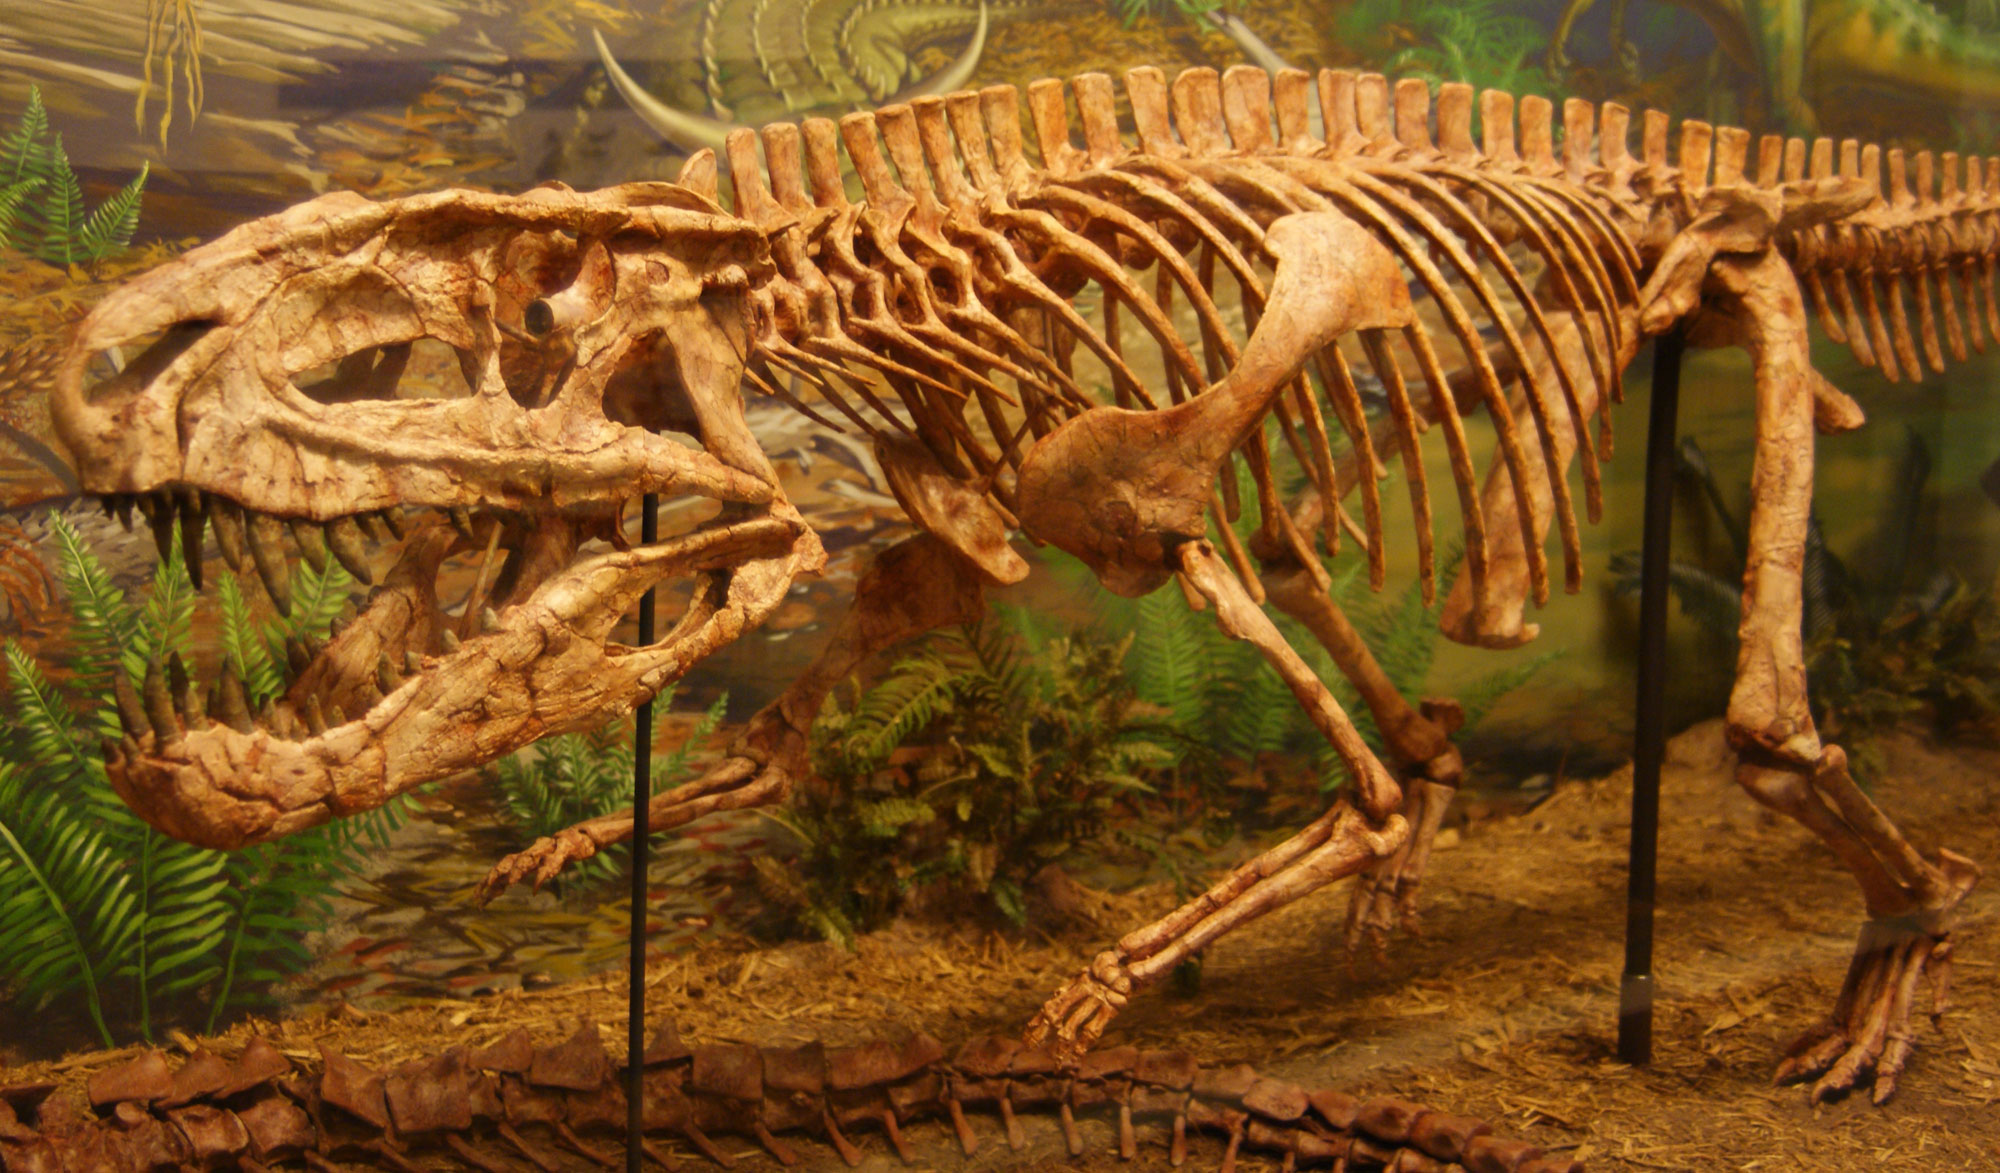 Photograph of a skeleton of Postosuchus on display at a museum. The animal was predatory, bipedal and had a relatively large head.